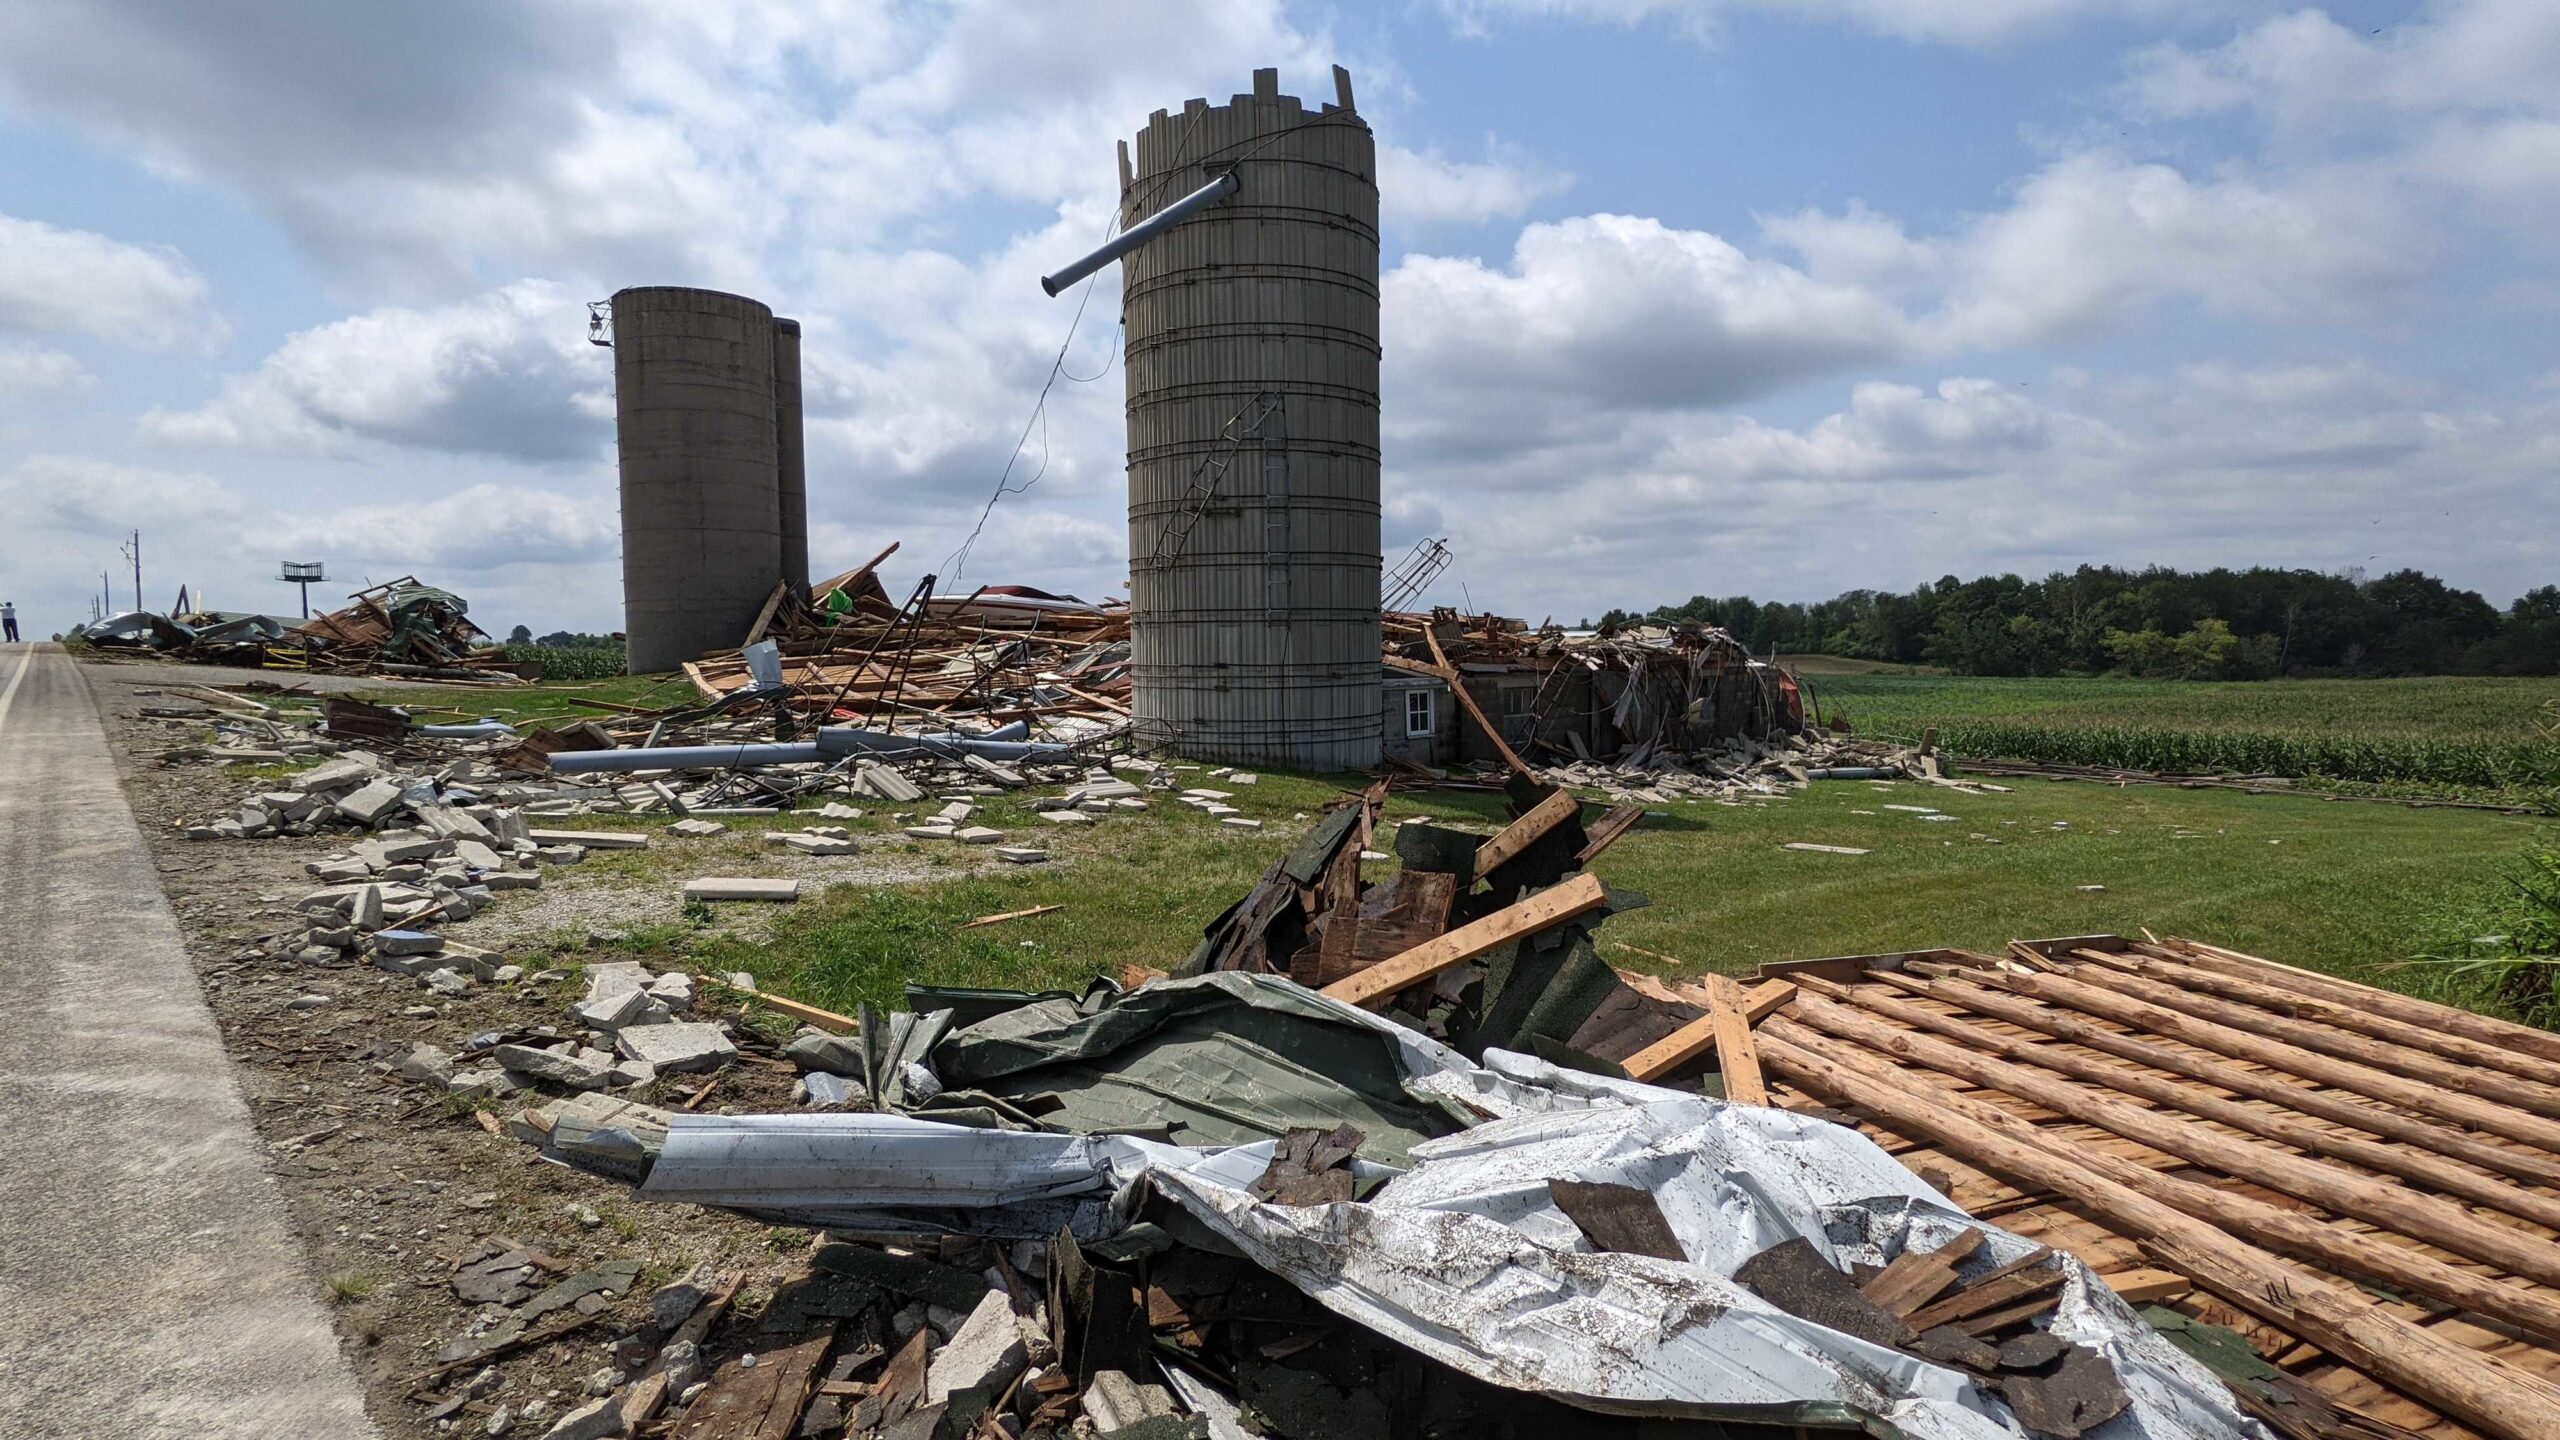 Damaging winds caused downed silos in the Town of Concord